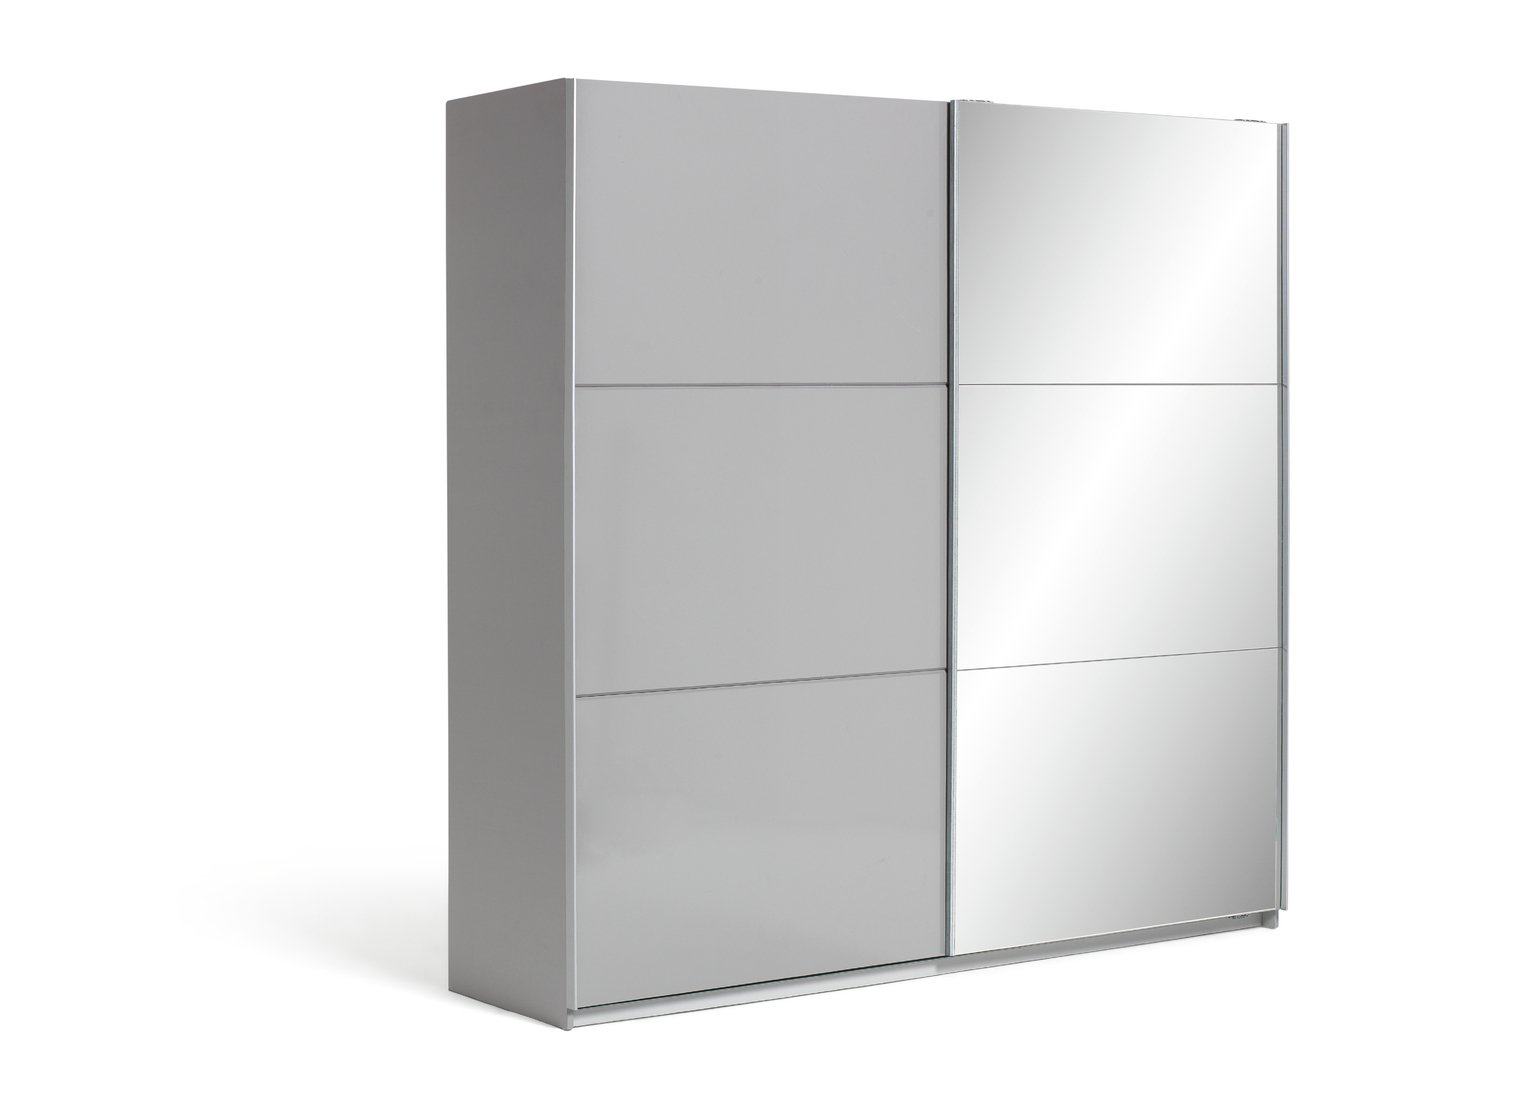 Argos Home Holsted Extra Large Grey Gloss & Mirror Wardrobe Review